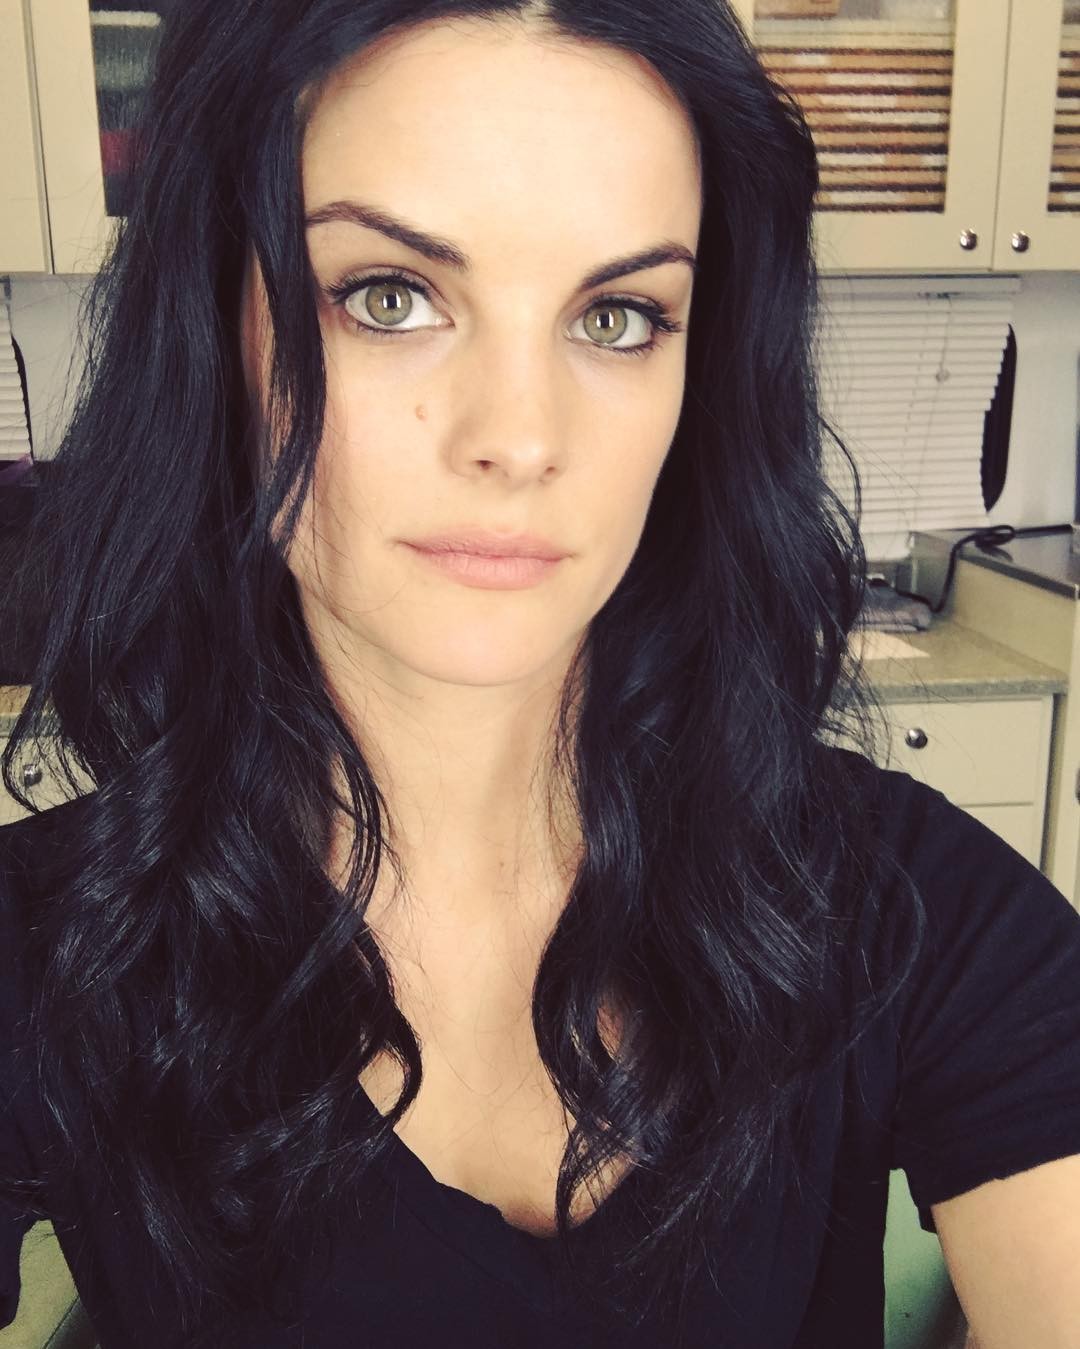 Jaimie Alexanders Sexiest Photos That You Never Seen Before TheFappening.Pro 13 - Jaimie Alexander Nude And Sexy (100 Photos)